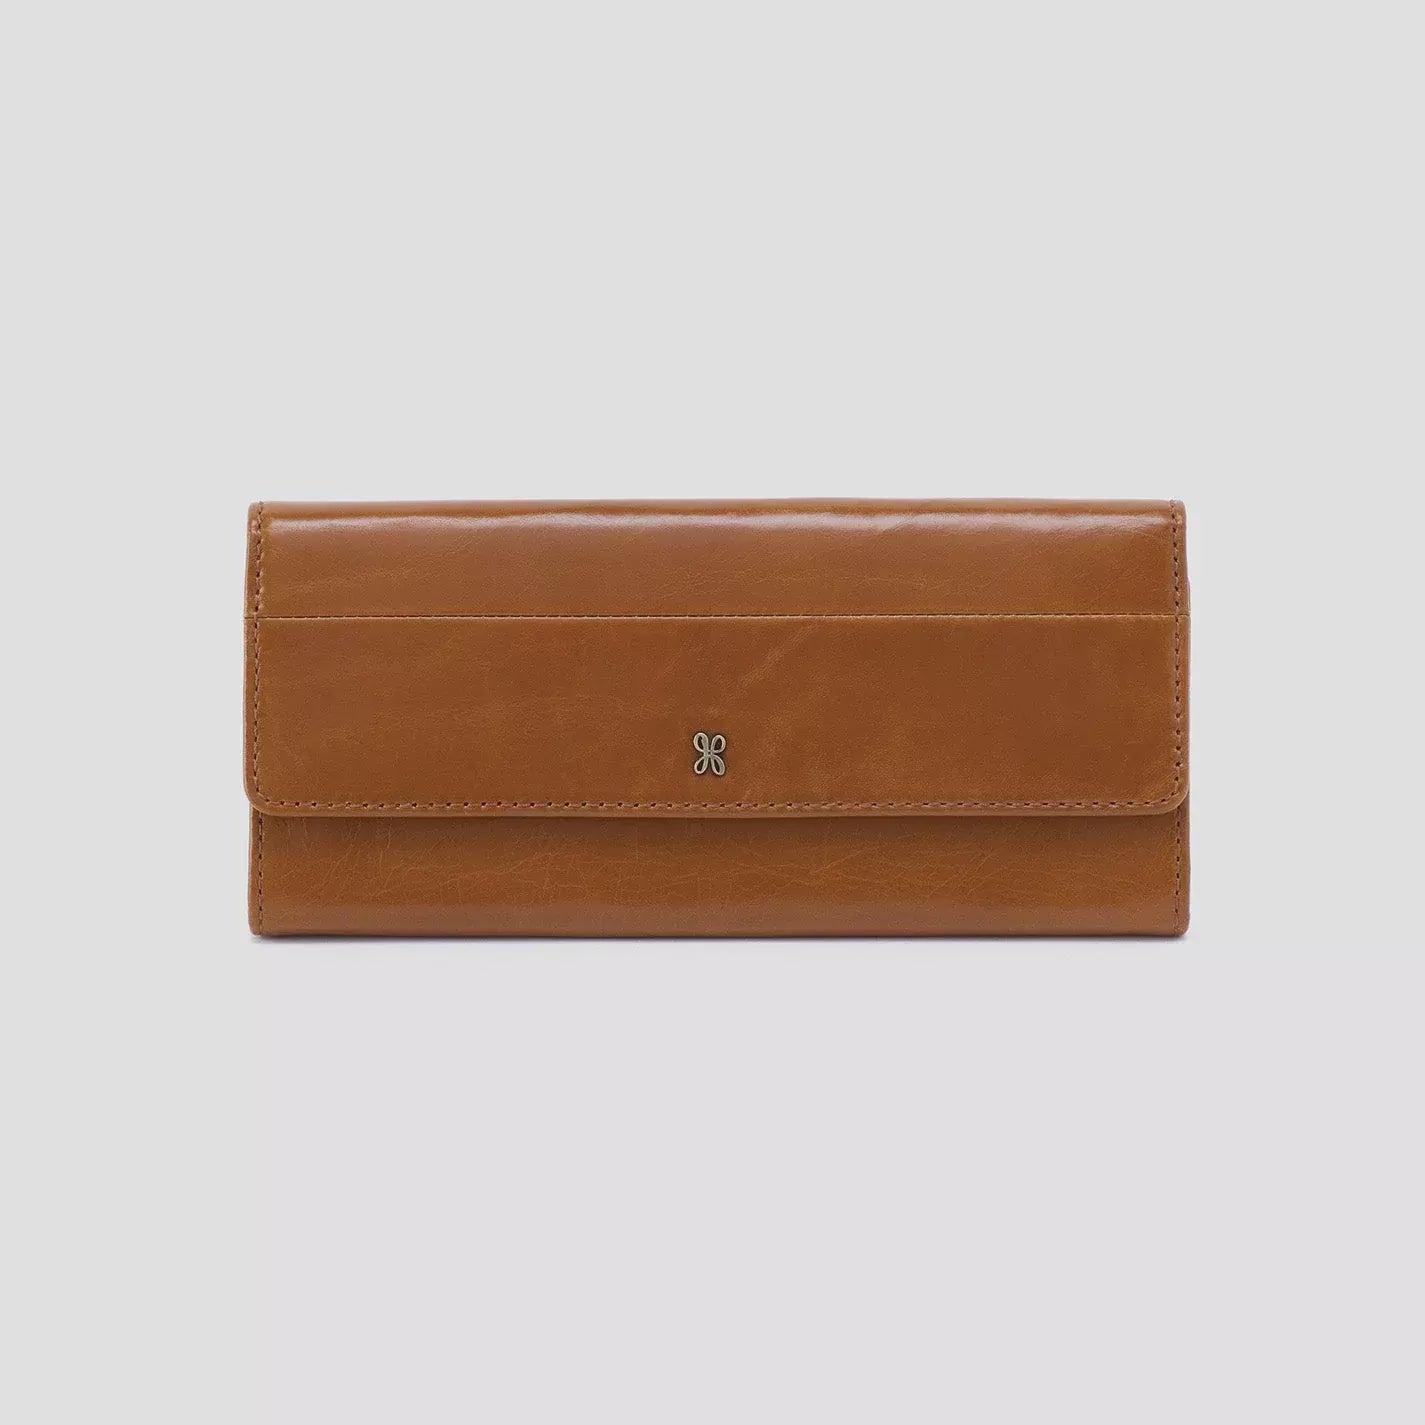 HOBO - JILL LARGE TRIFOLD WALLET IN TRUFFLE POLISHED LEATHER